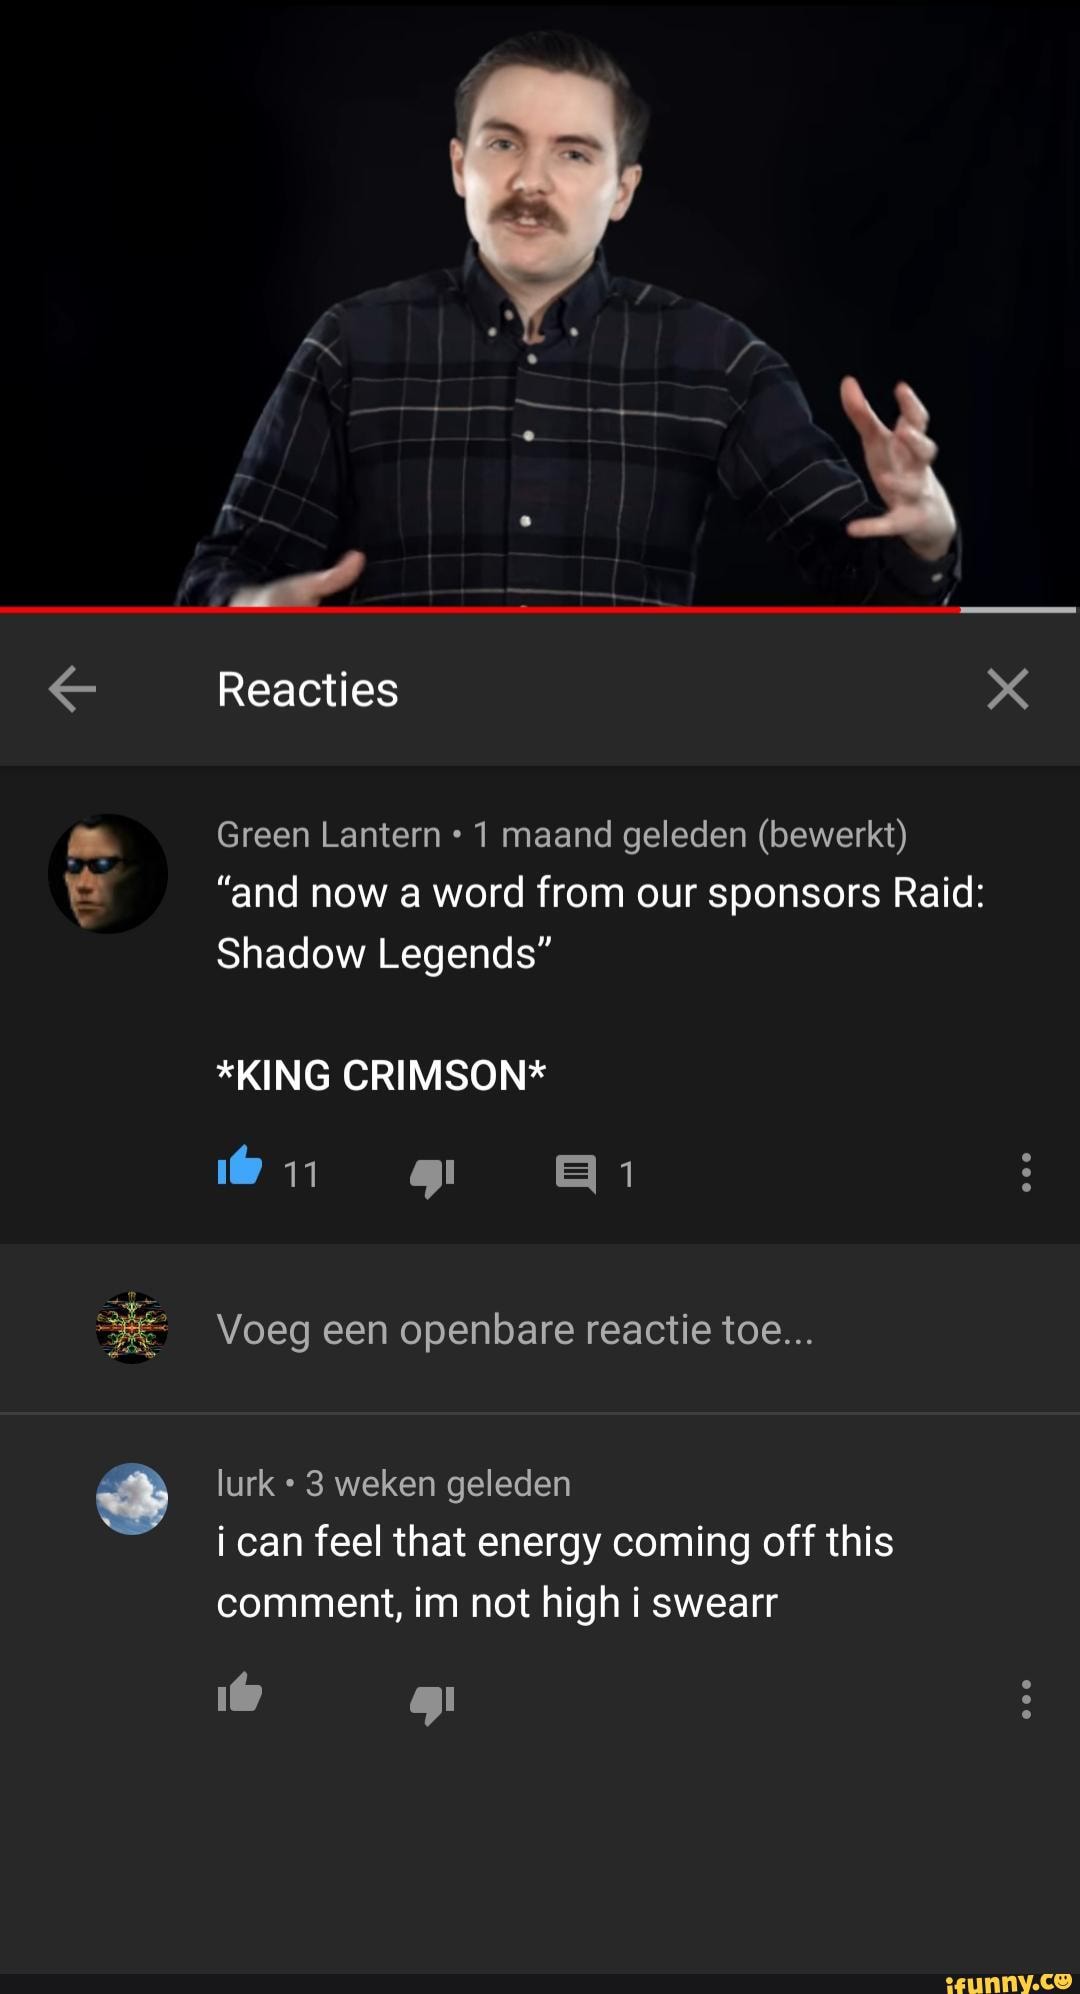 and now a word from our sponsor raid shadow legends